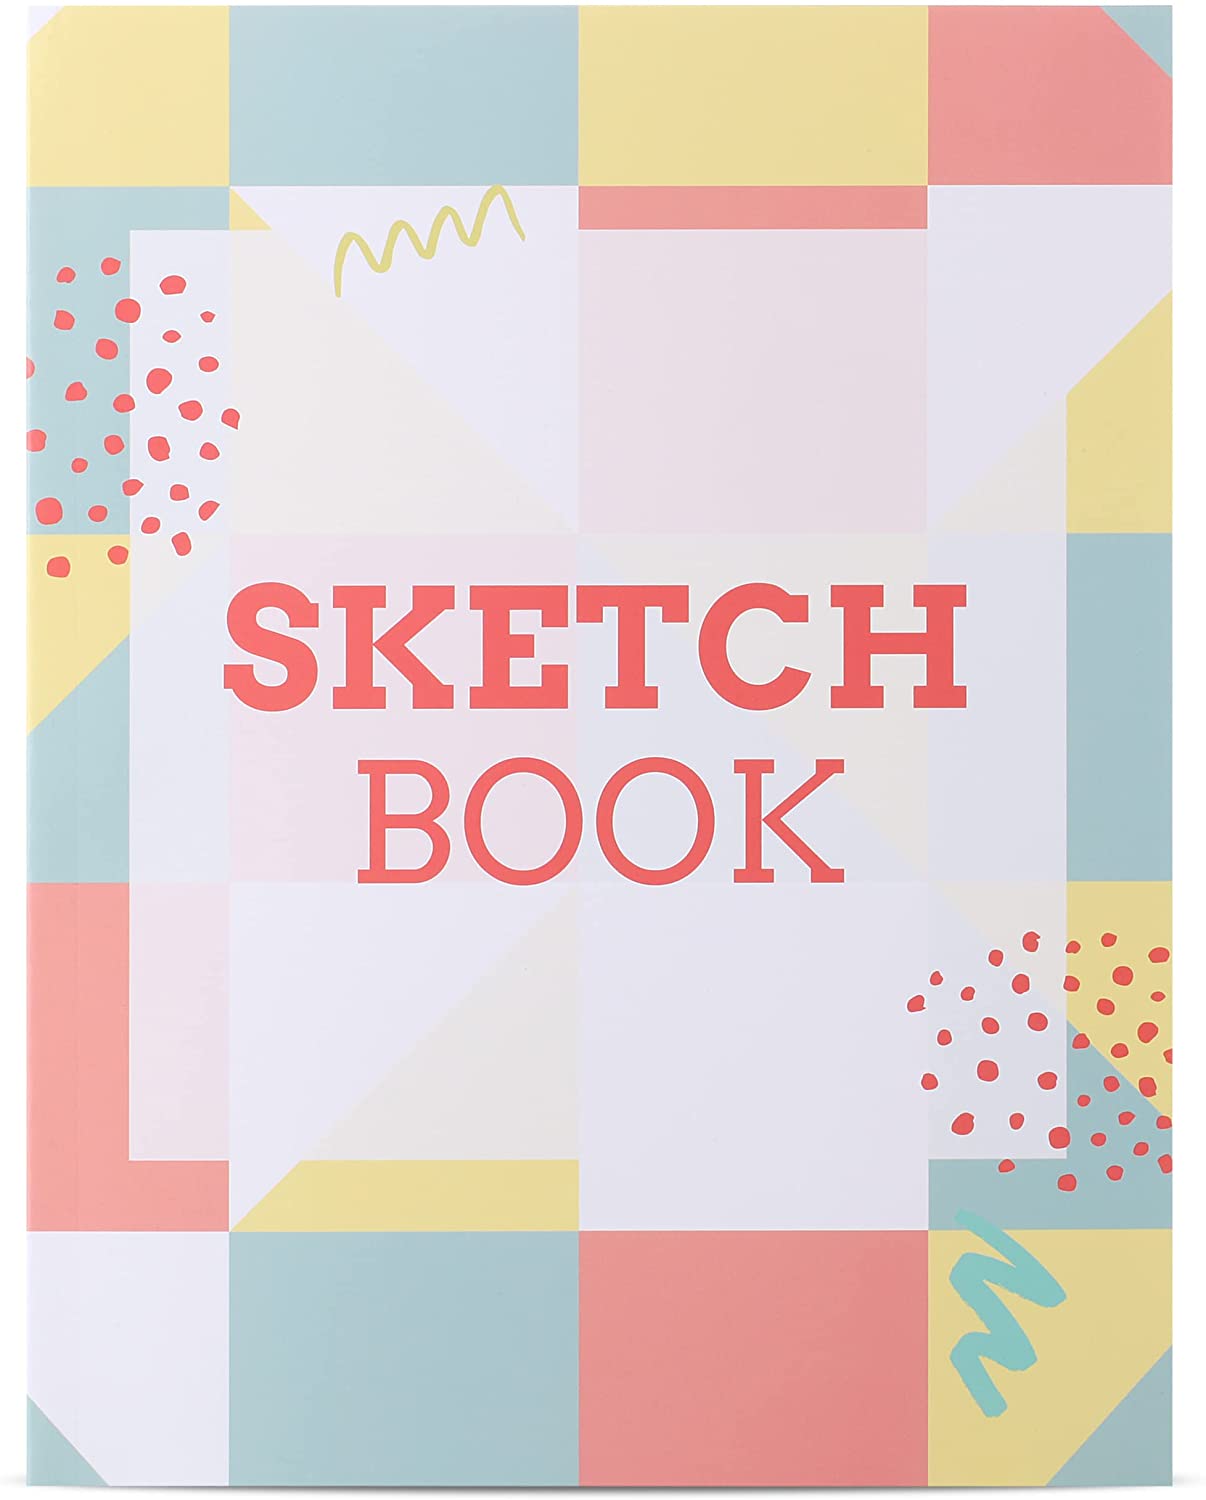 Mr. Pen- Sketch Book, 8.5 inch x 11 inch, 36 Pages, Drawing Book, Drawing Pad, Sketch Book for Drawings, Drawing Notebook, Sketchpad, Sketchbook for